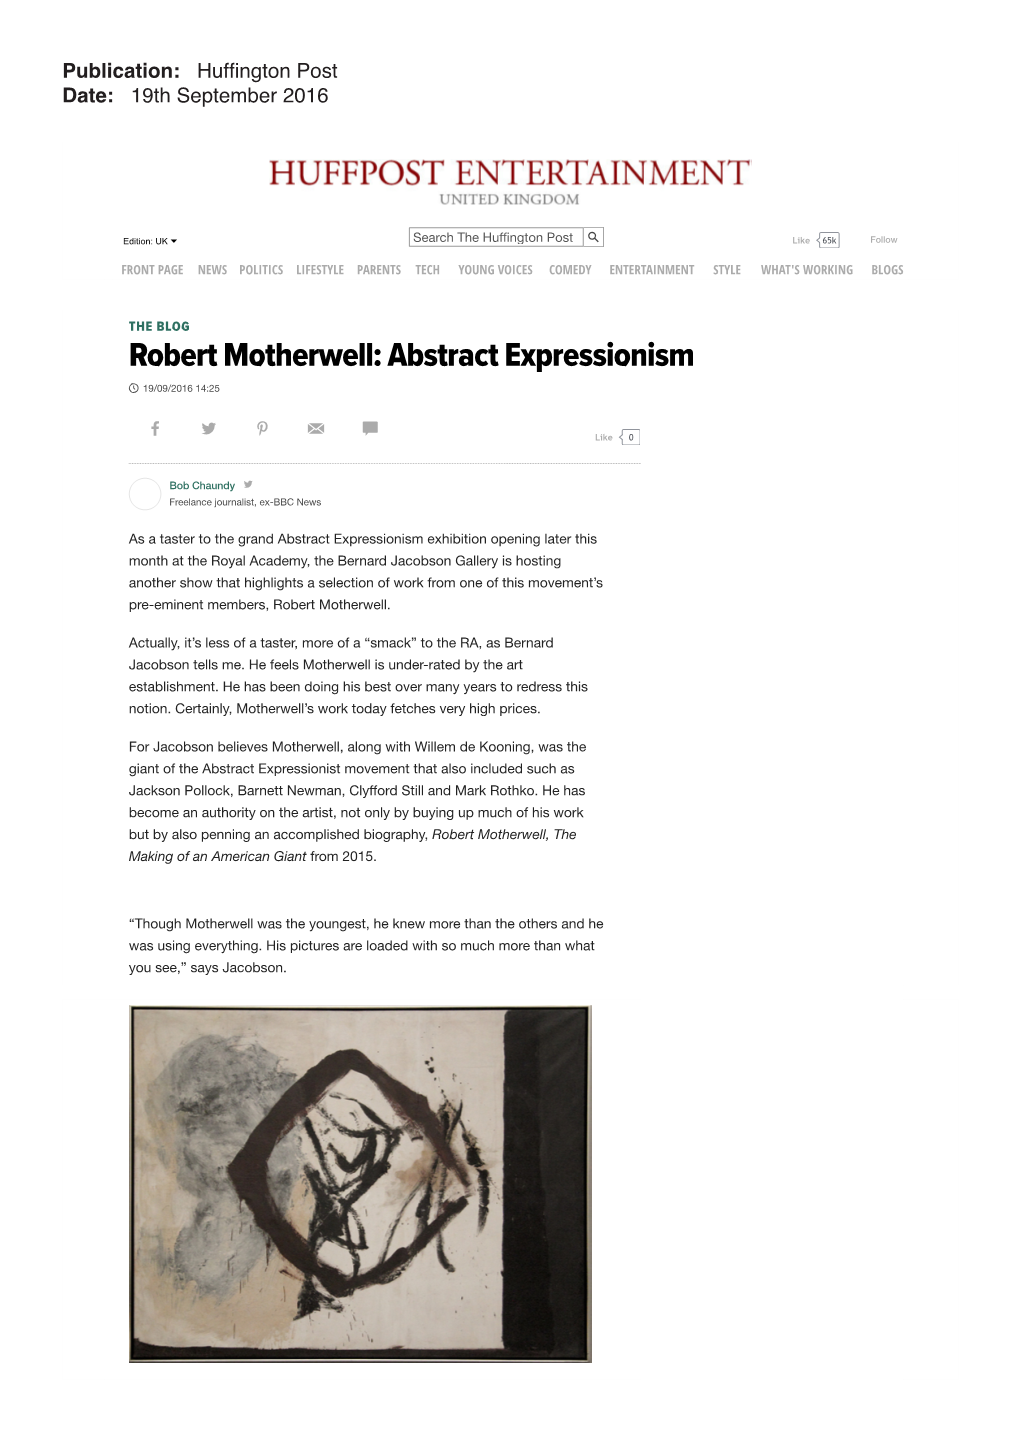 Robert Motherwell: Abstract Expressionism | Hufﬁngton Post